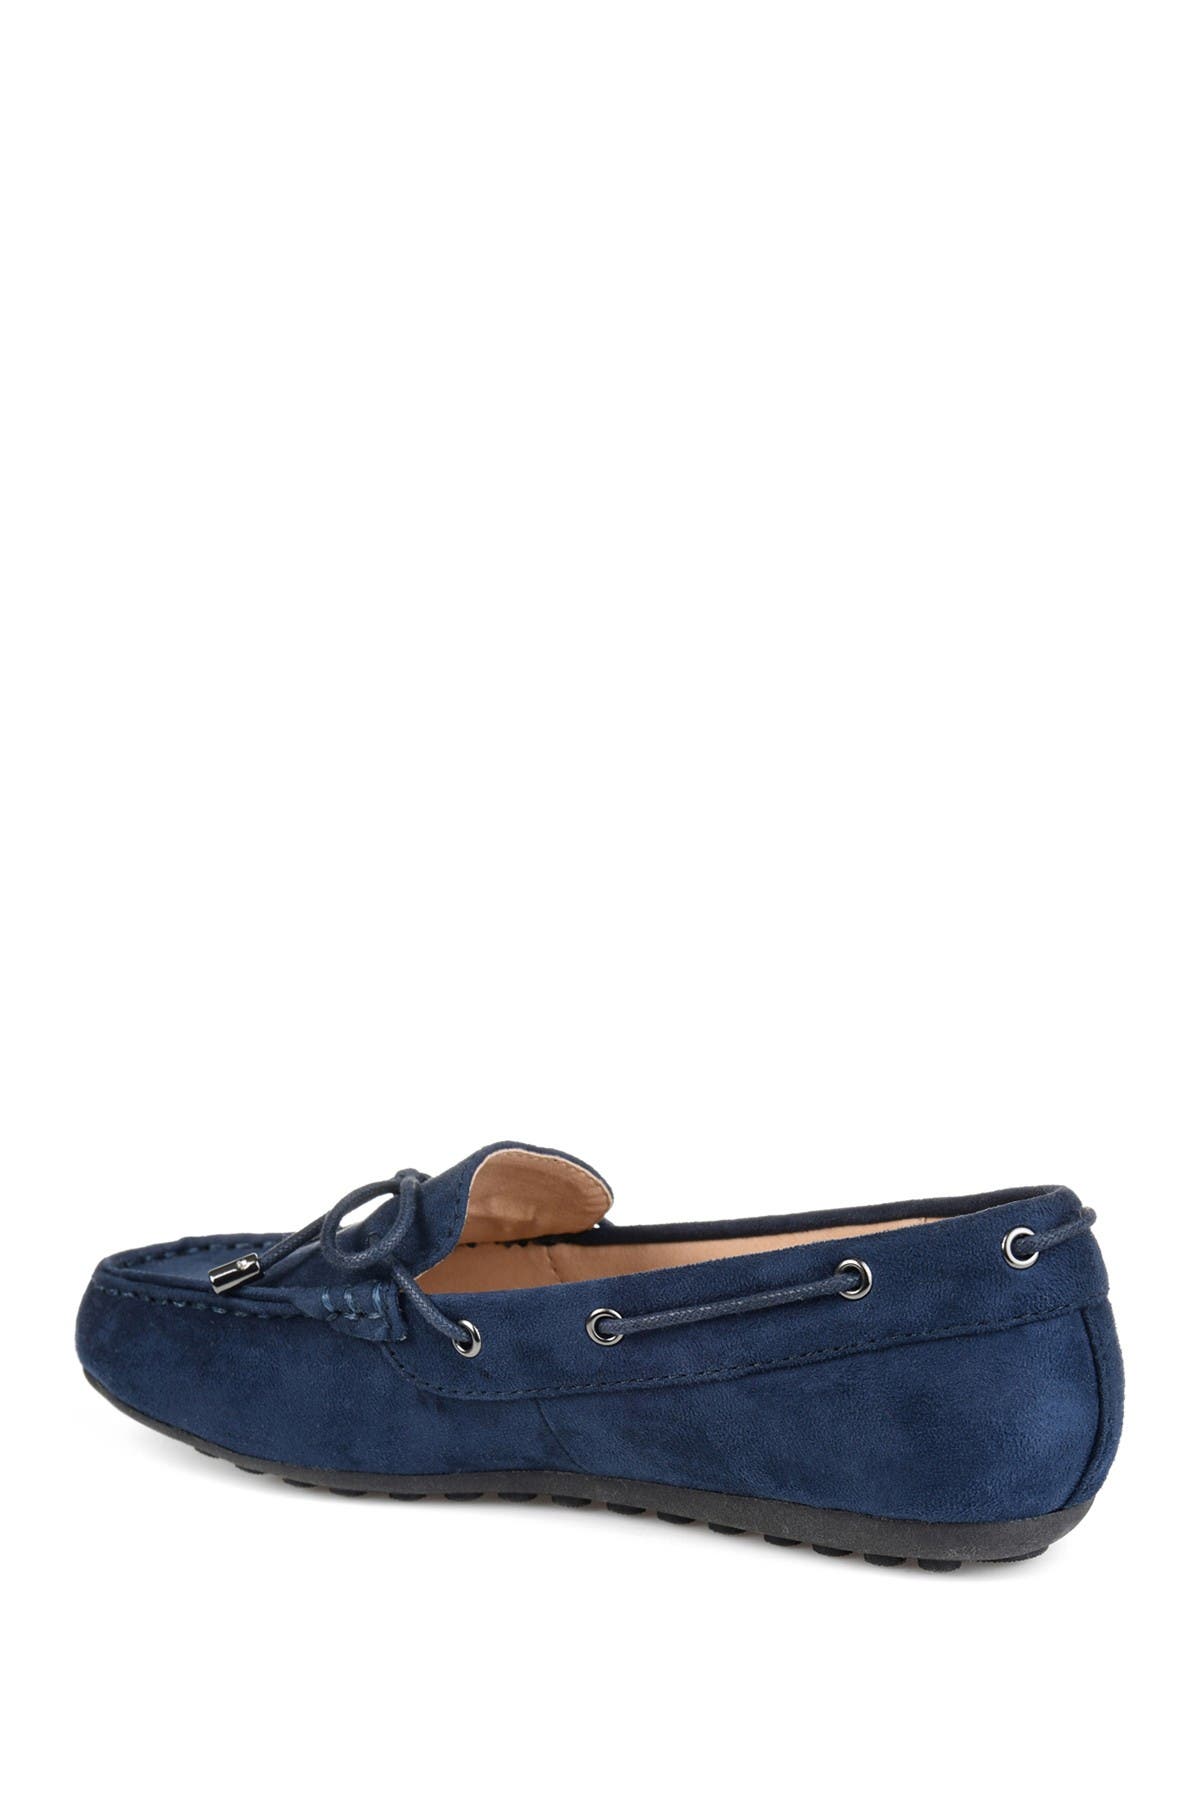 Journee Collection Thatch Slip-on Loafer In Navy2